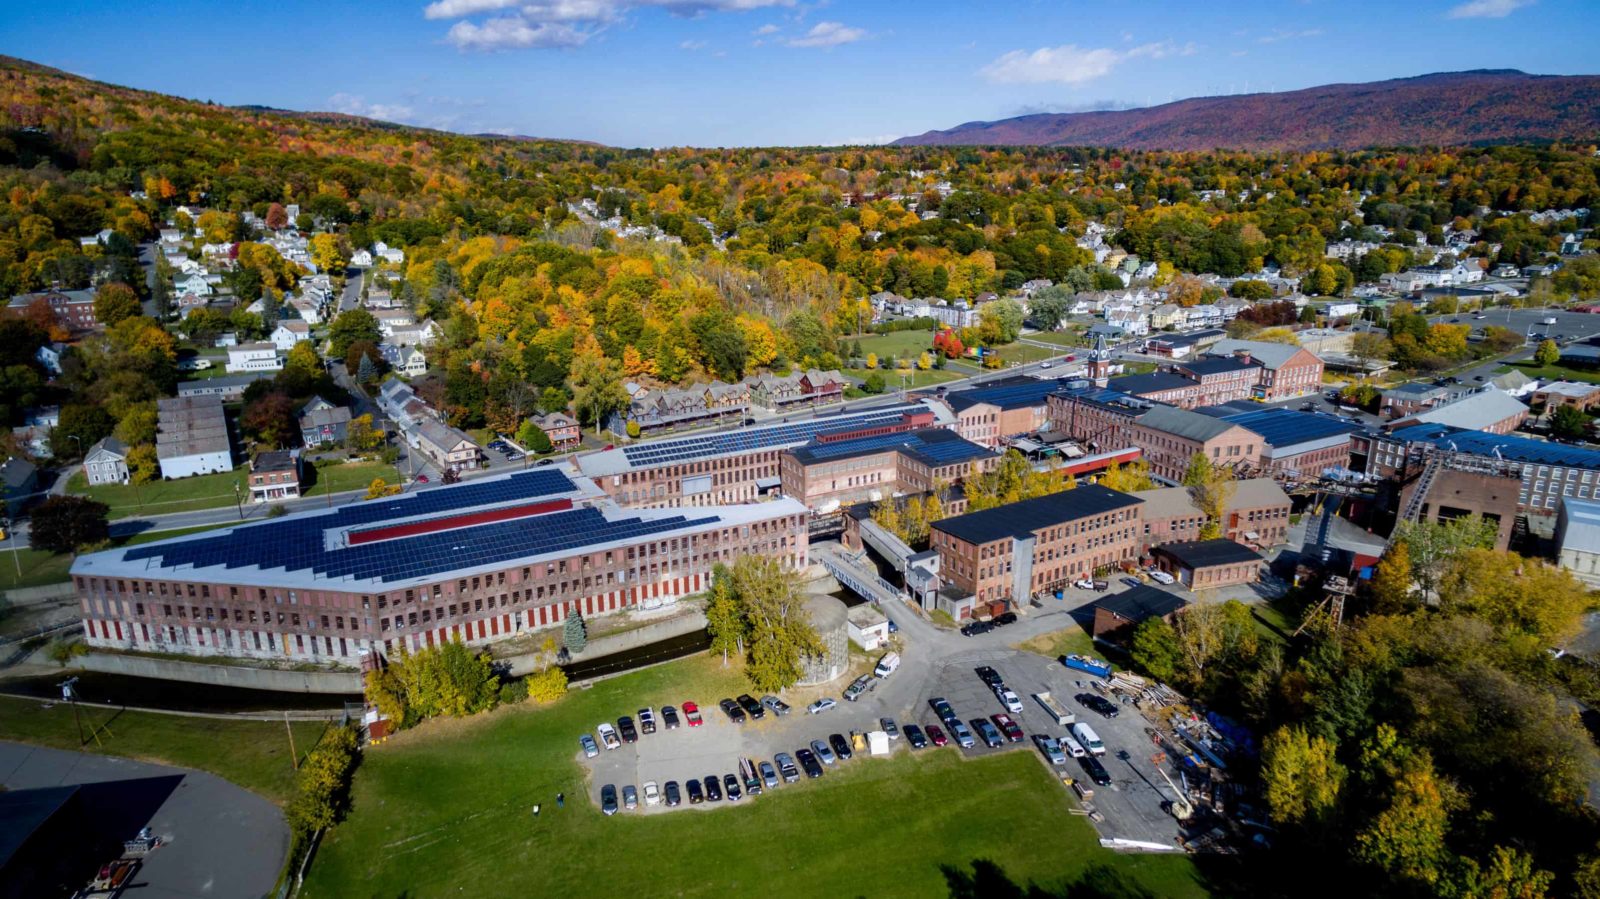 An aerial view of Mass MoCA at the foot of Mount Greylock. Press photo courtesy of Mass MocA.